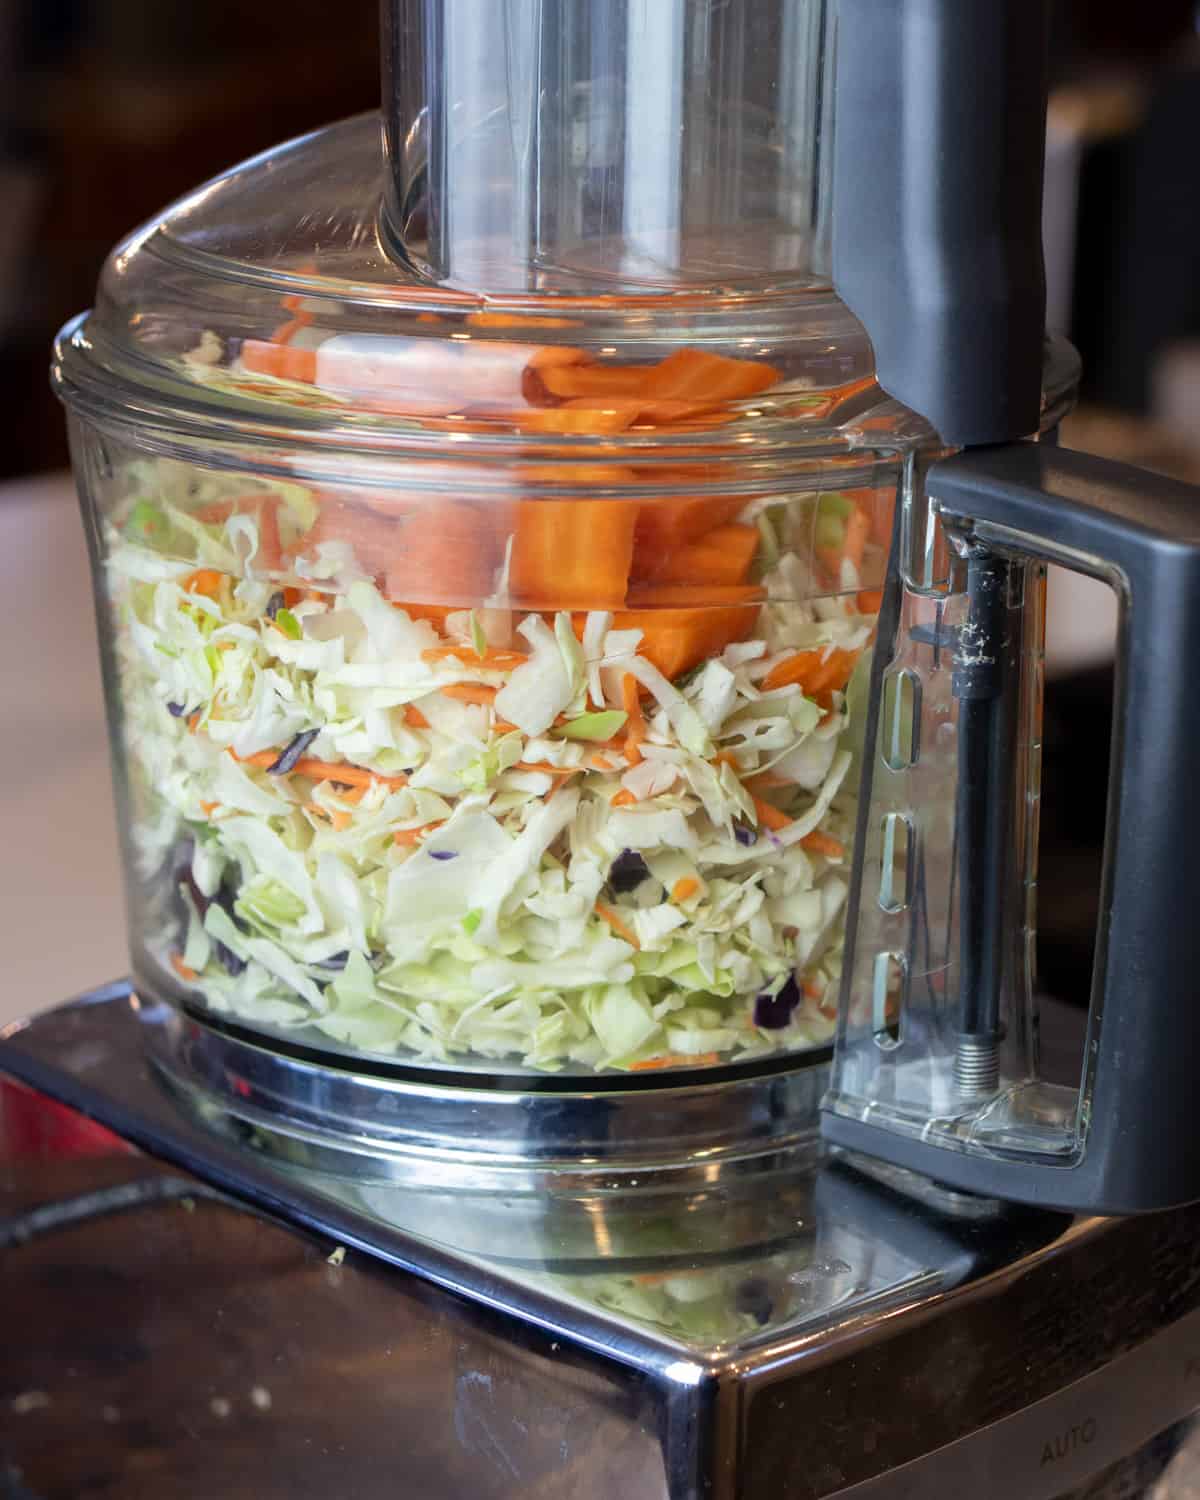 Vegetables in a food processor